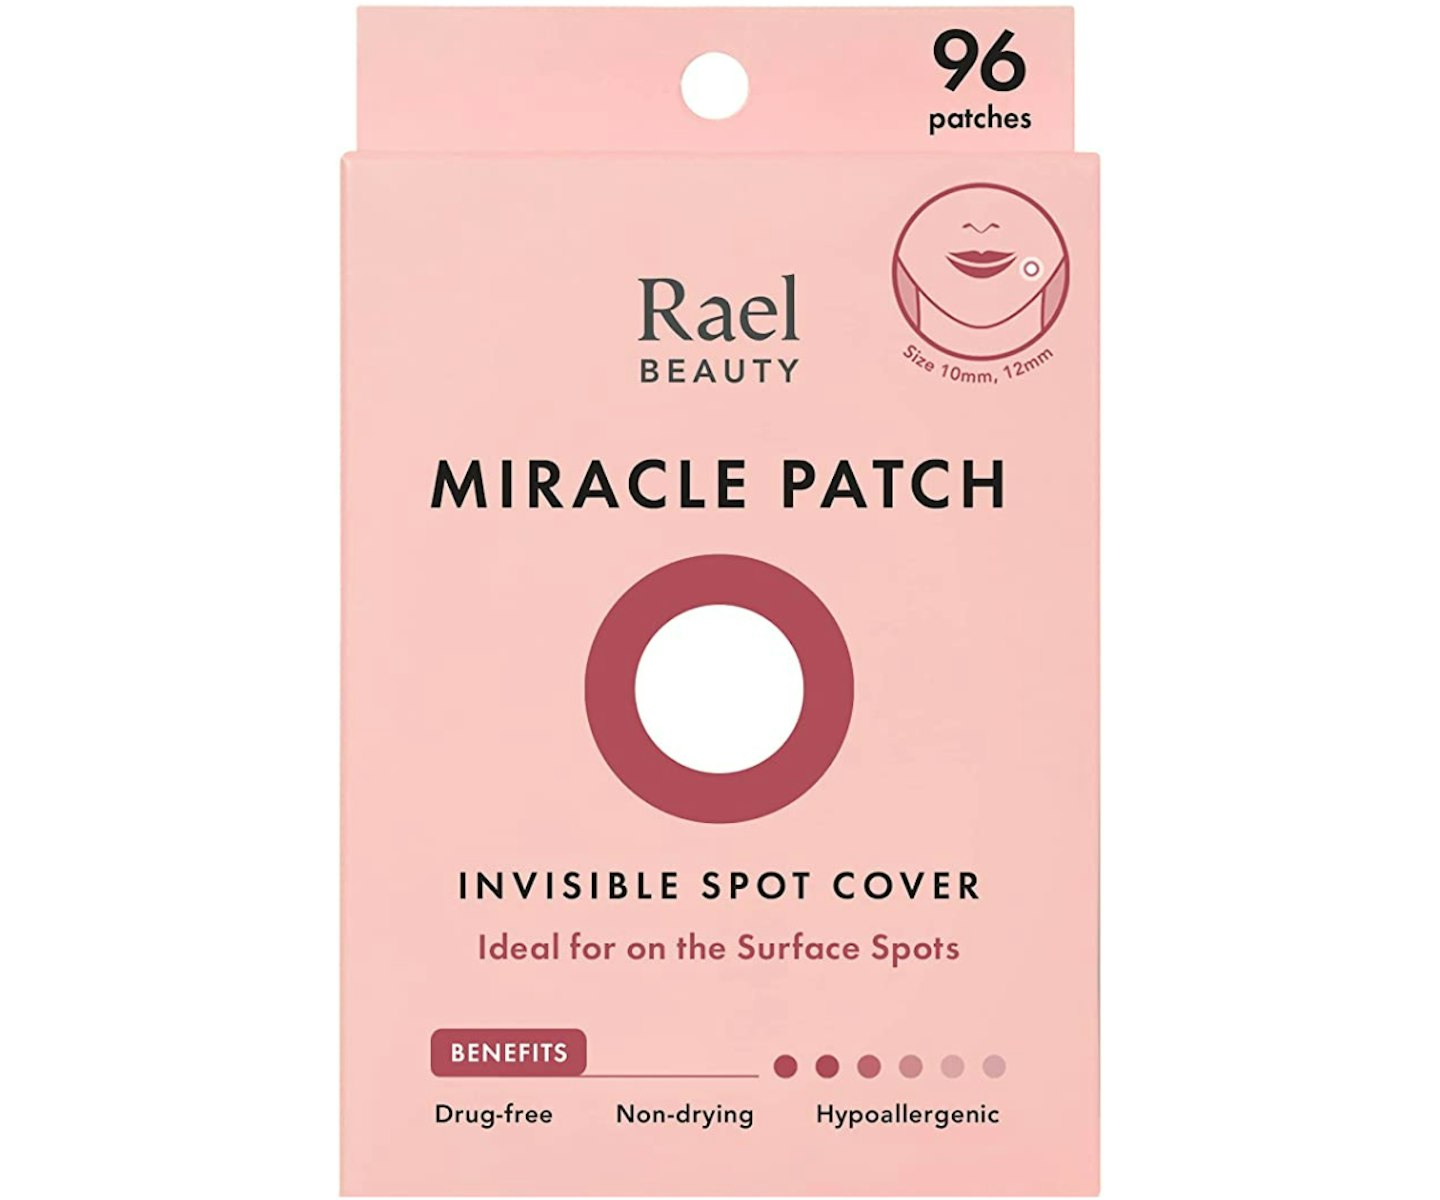 A picture of the Rael Beauty Miracle Patch.